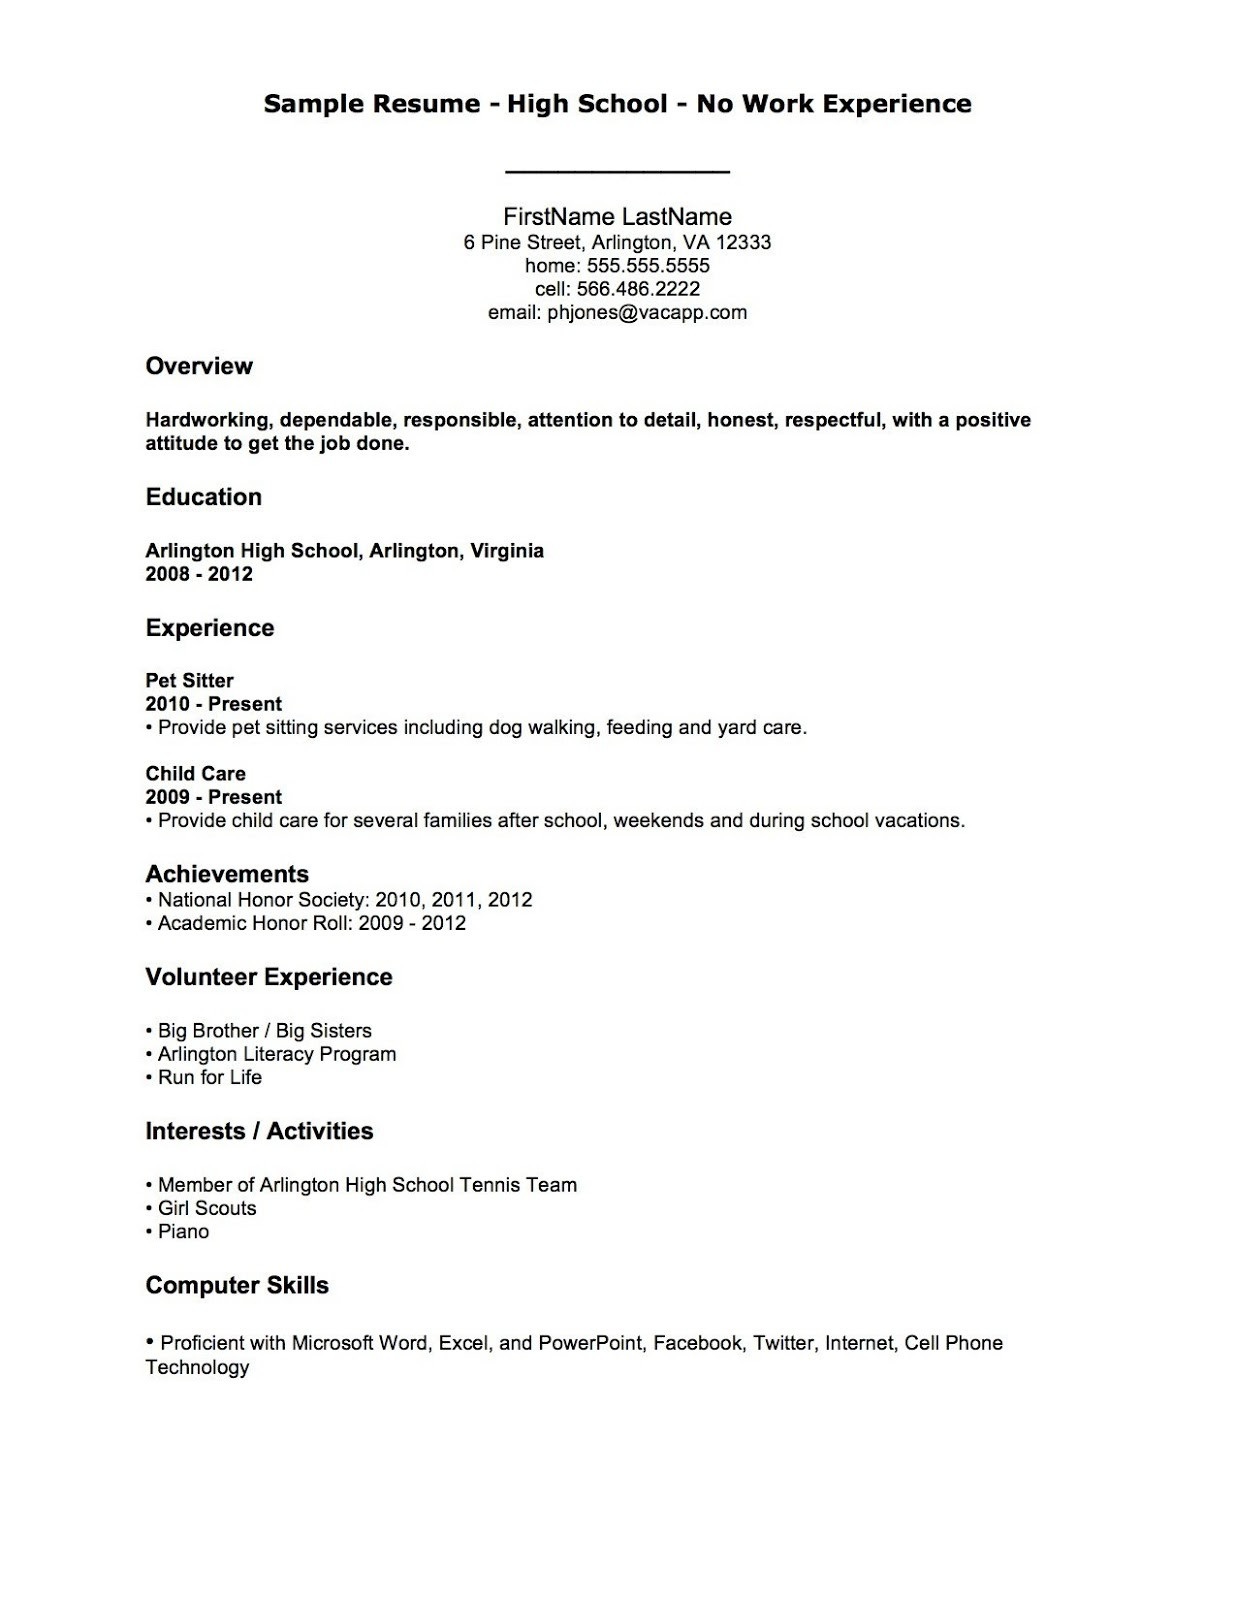 Resume Template for First Job after College First Resume after College â How to Write A Successful College …